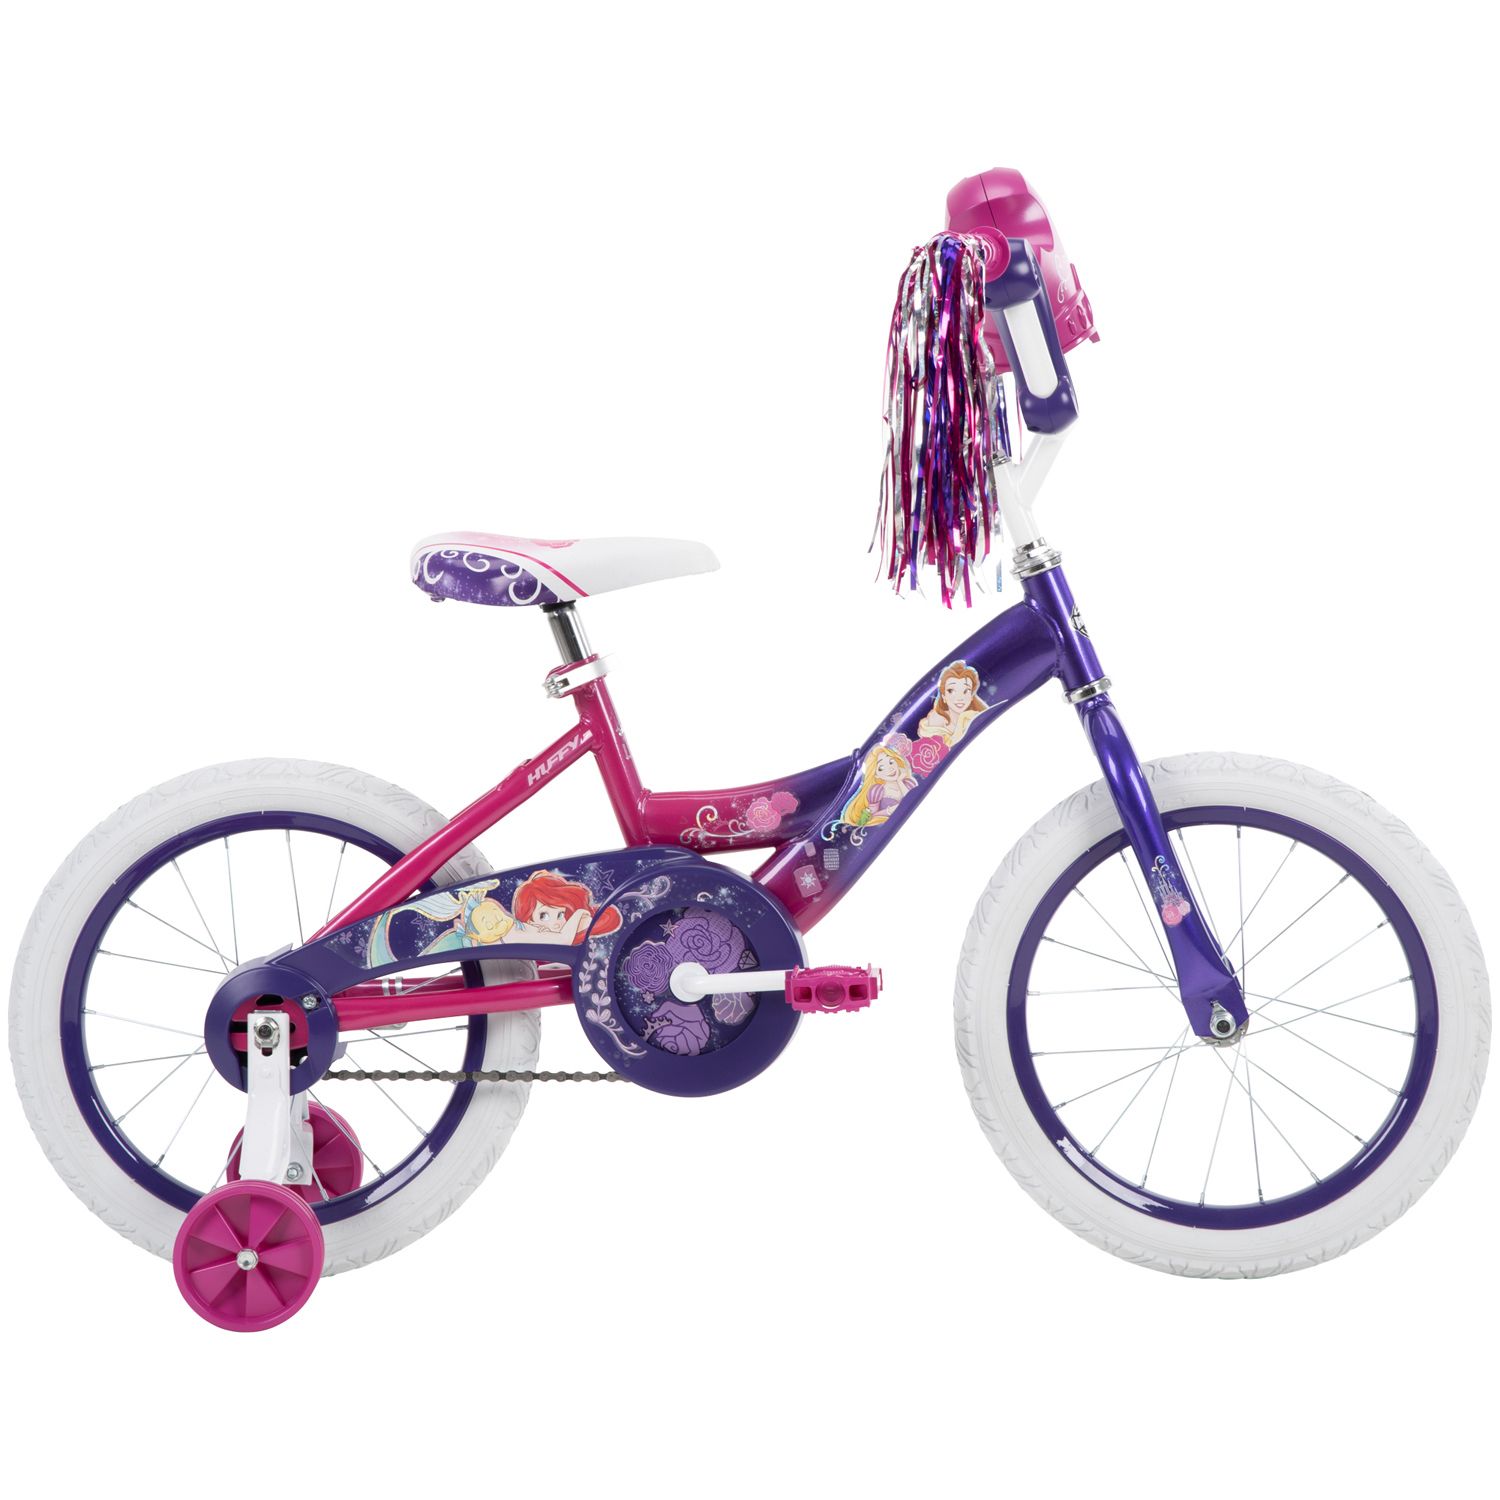 Image for Huffy Disney Princess 16-Inch Girls' Bike by at Kohl's.